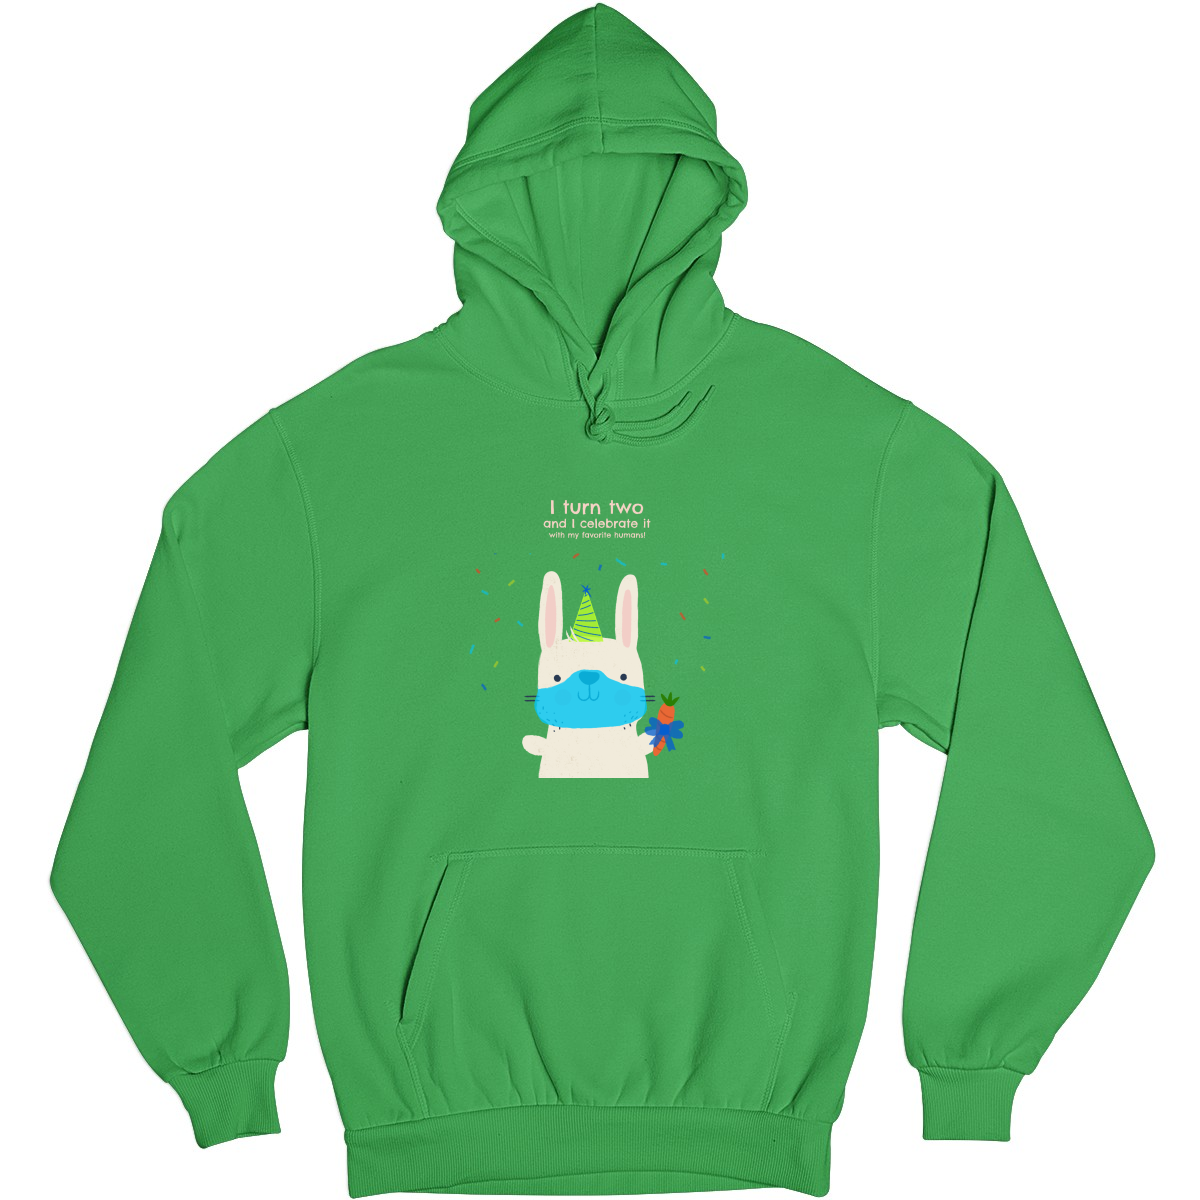 I turn two and I celebrate it with my favorite humans  Unisex Hoodie | Green